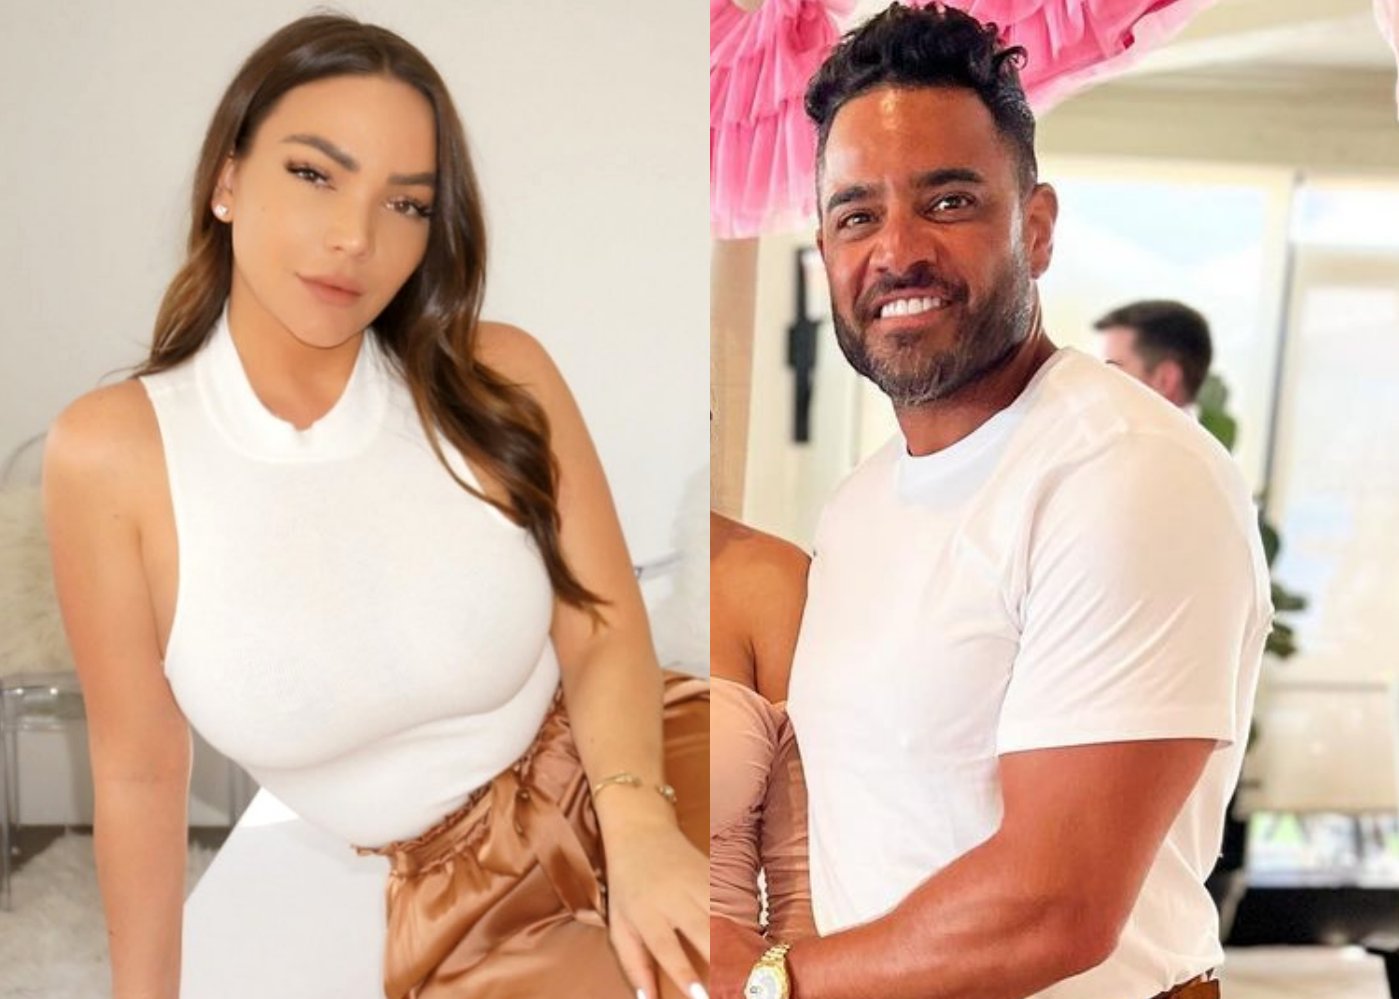 PHOTO: Mike Shouhed's Ex-Wife Jessica Parido is Engaged, See Pics of Her Fiance & Engagement Ring, Plus "Best Week Ever"